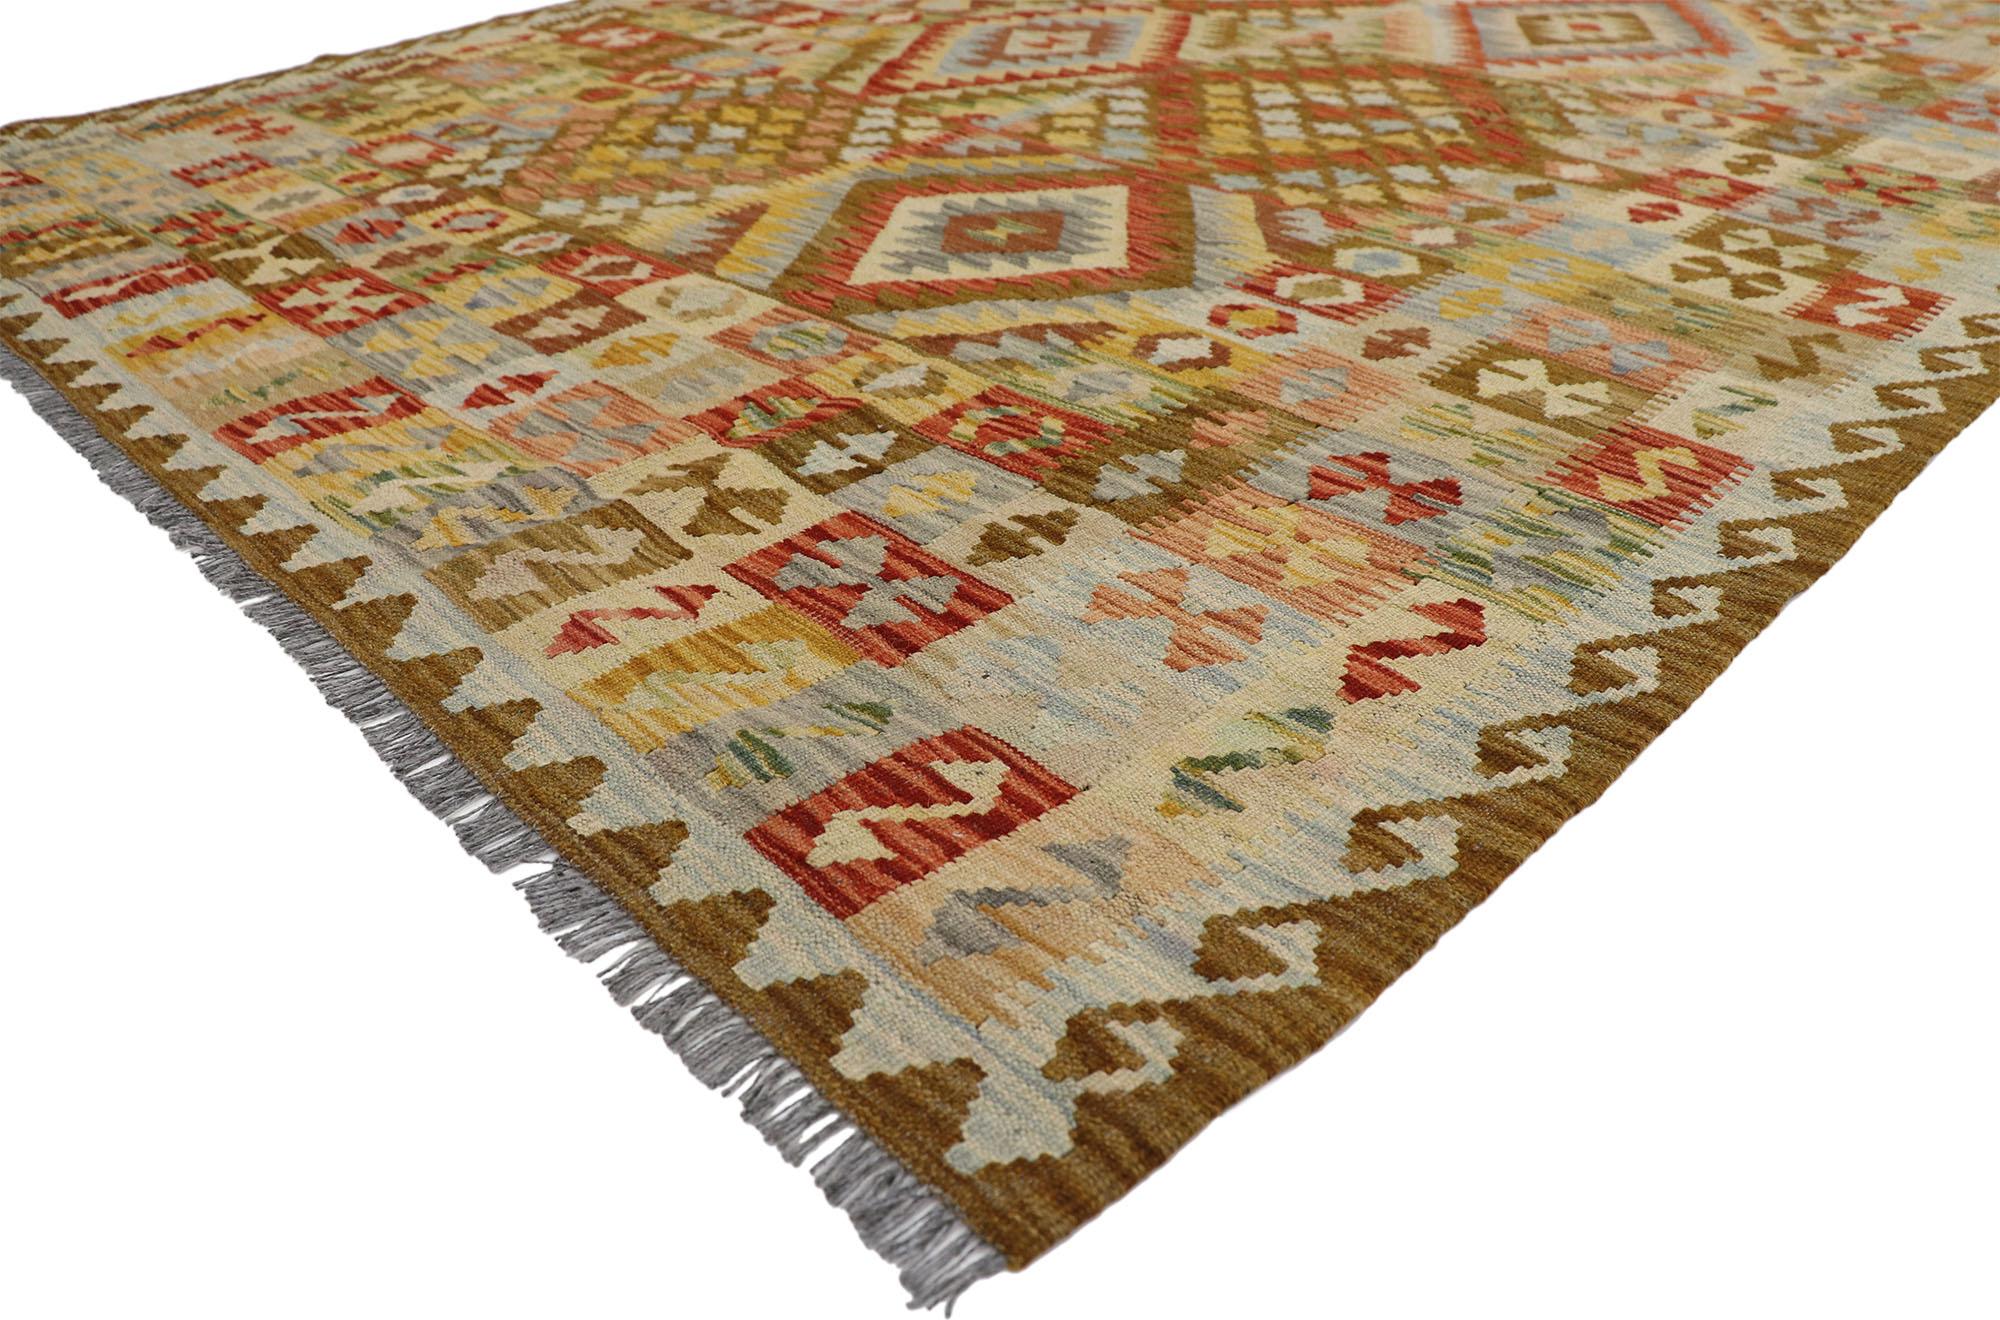 80165 Vintage Afghani Kilim rug, 06'00 x 08'02. Full of tiny details and nomadic charm, this handwoven wool vintage Afghan kilim rug is a captivating vision of woven beauty. The eye-catching tribal design and vibrant earth-tone colors woven into